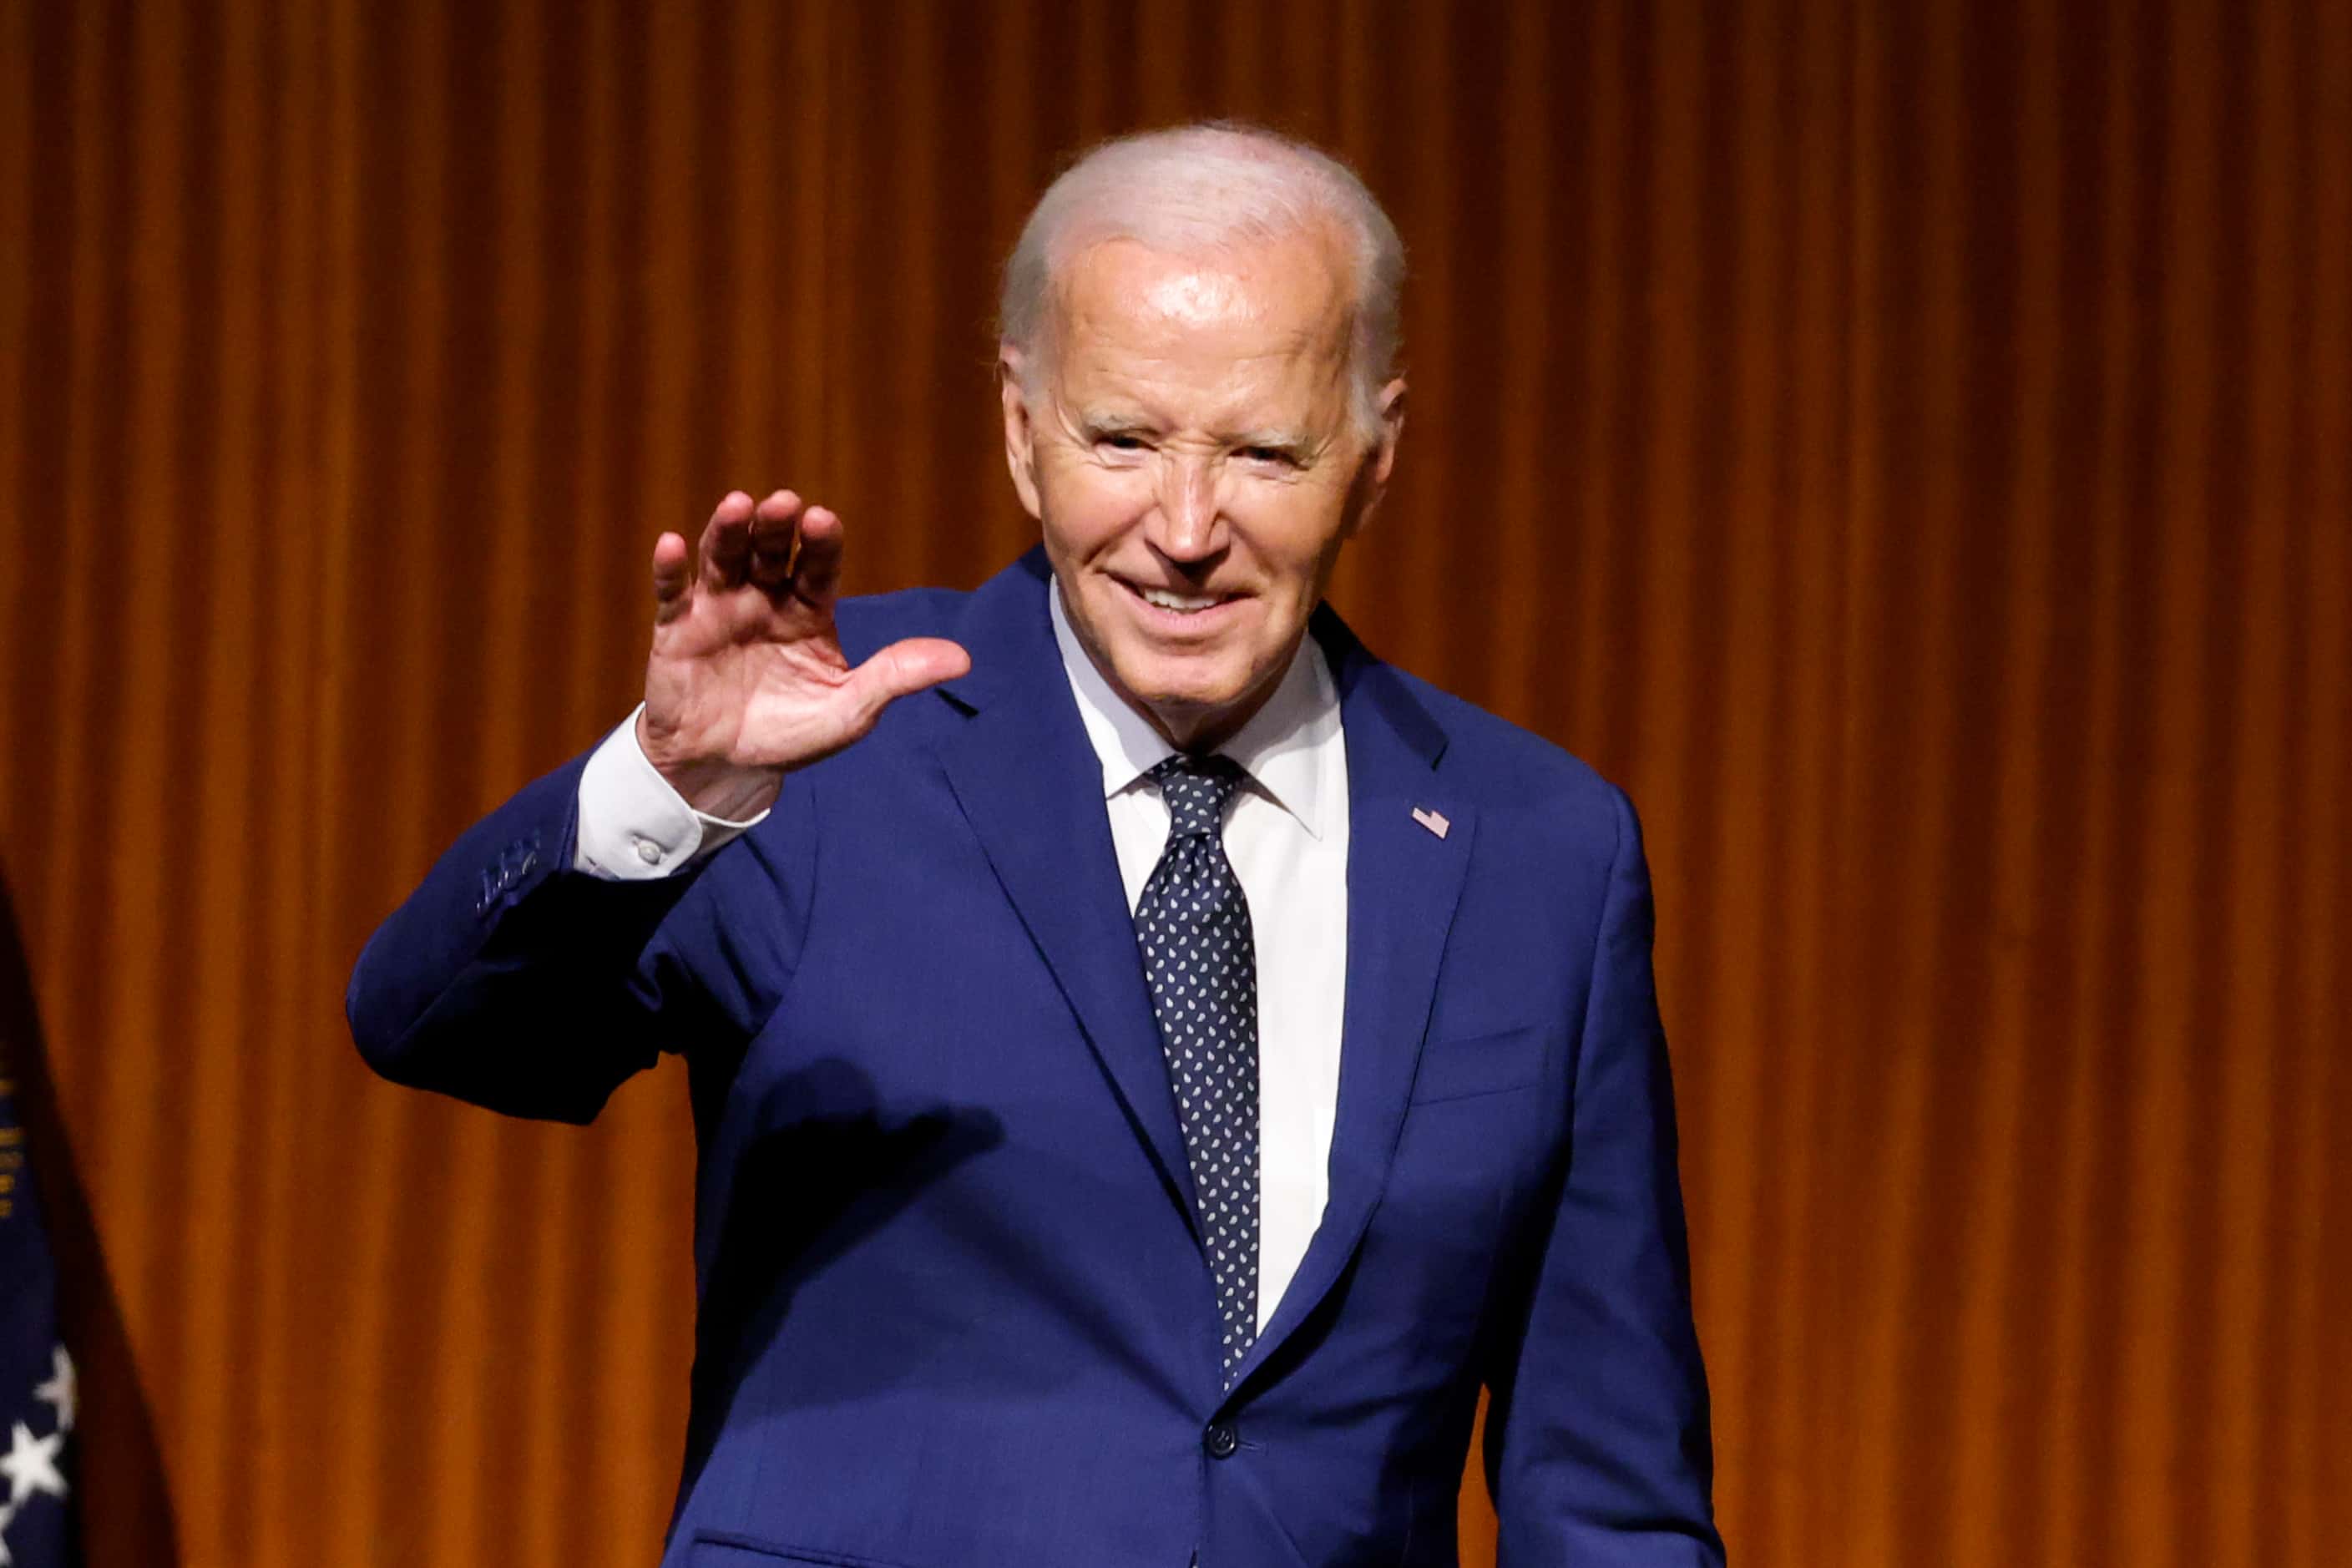 President Joe Biden waves to the audience after speaking during an event commemorating the...